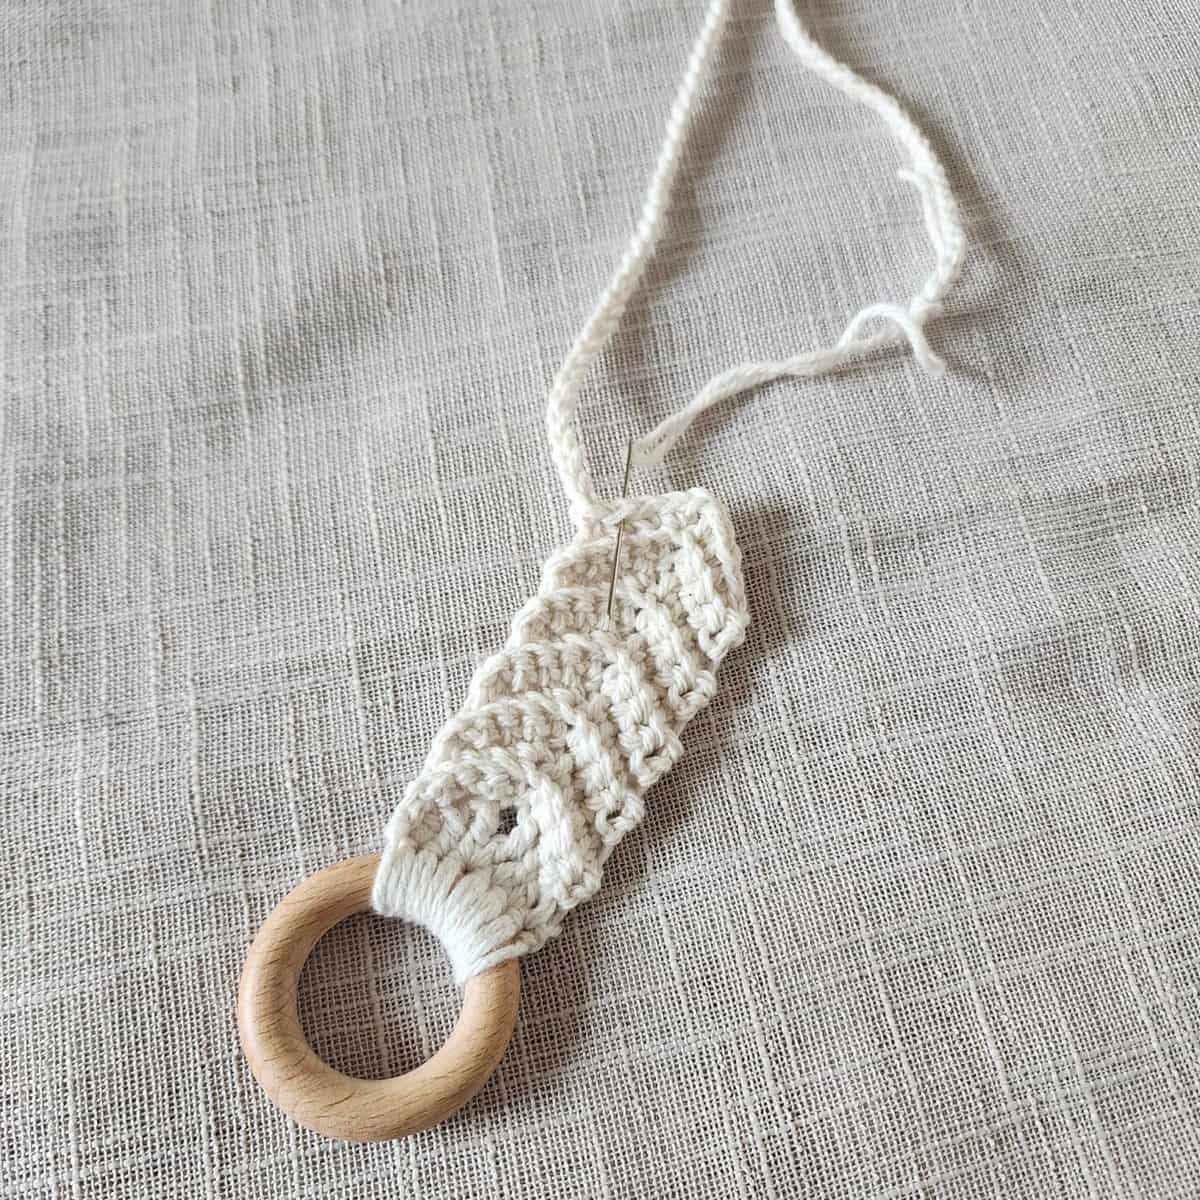 Crochet plant hanger being attached to hanging straps.